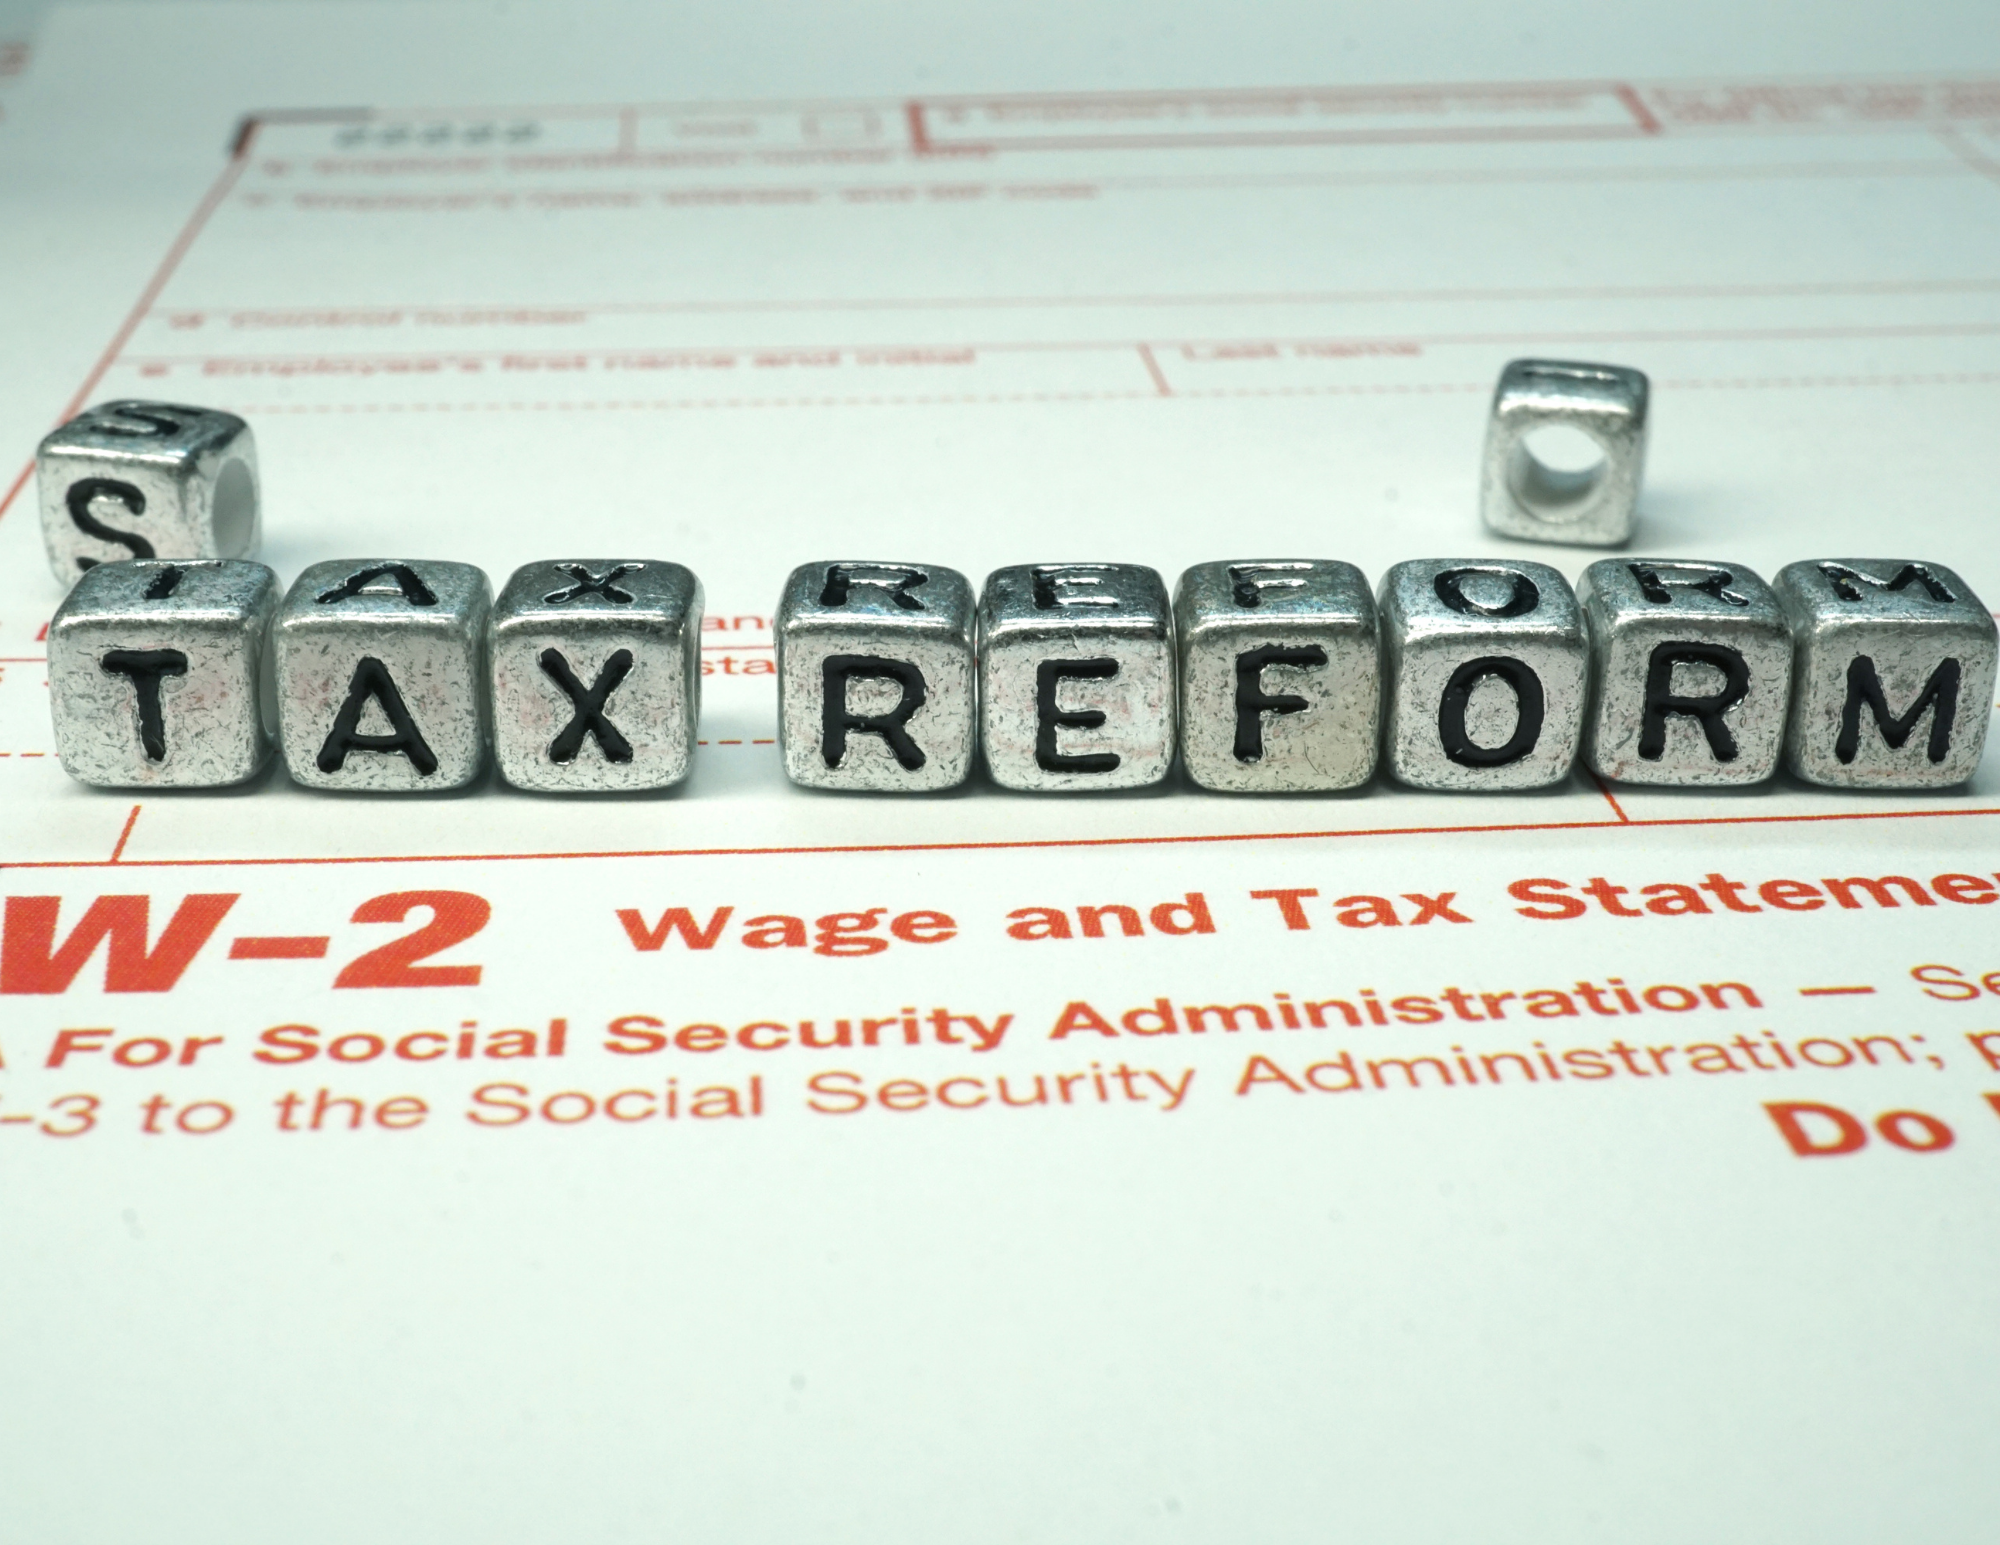 A Comprehensive Guide on Tax Reforms for 2022